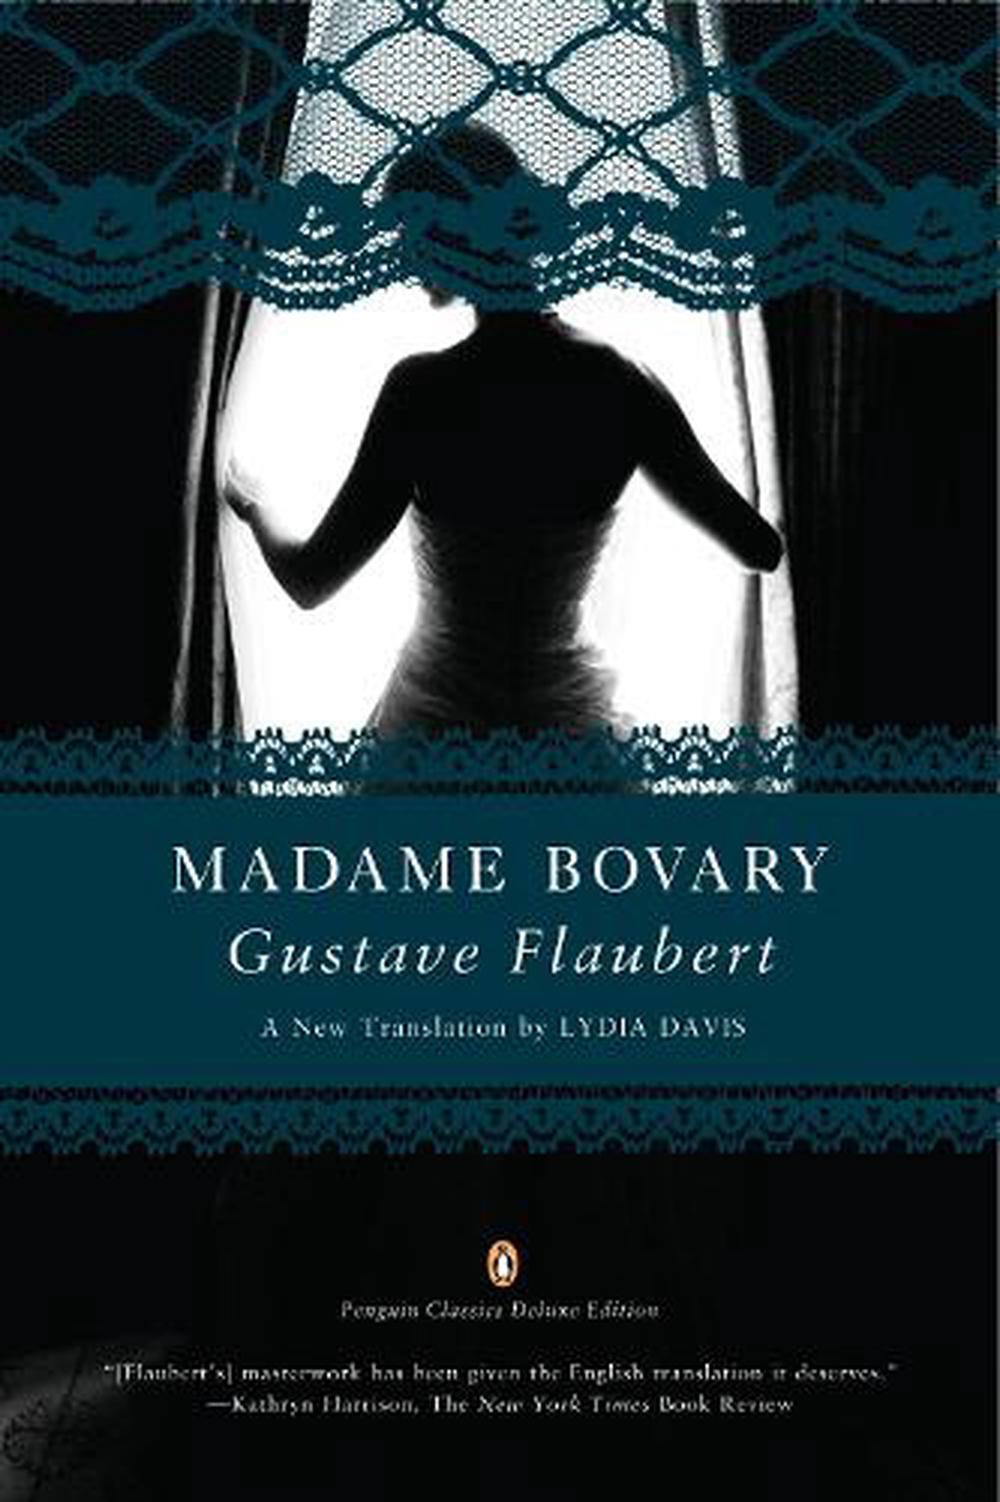 Madame Bovary download the new version for ipod